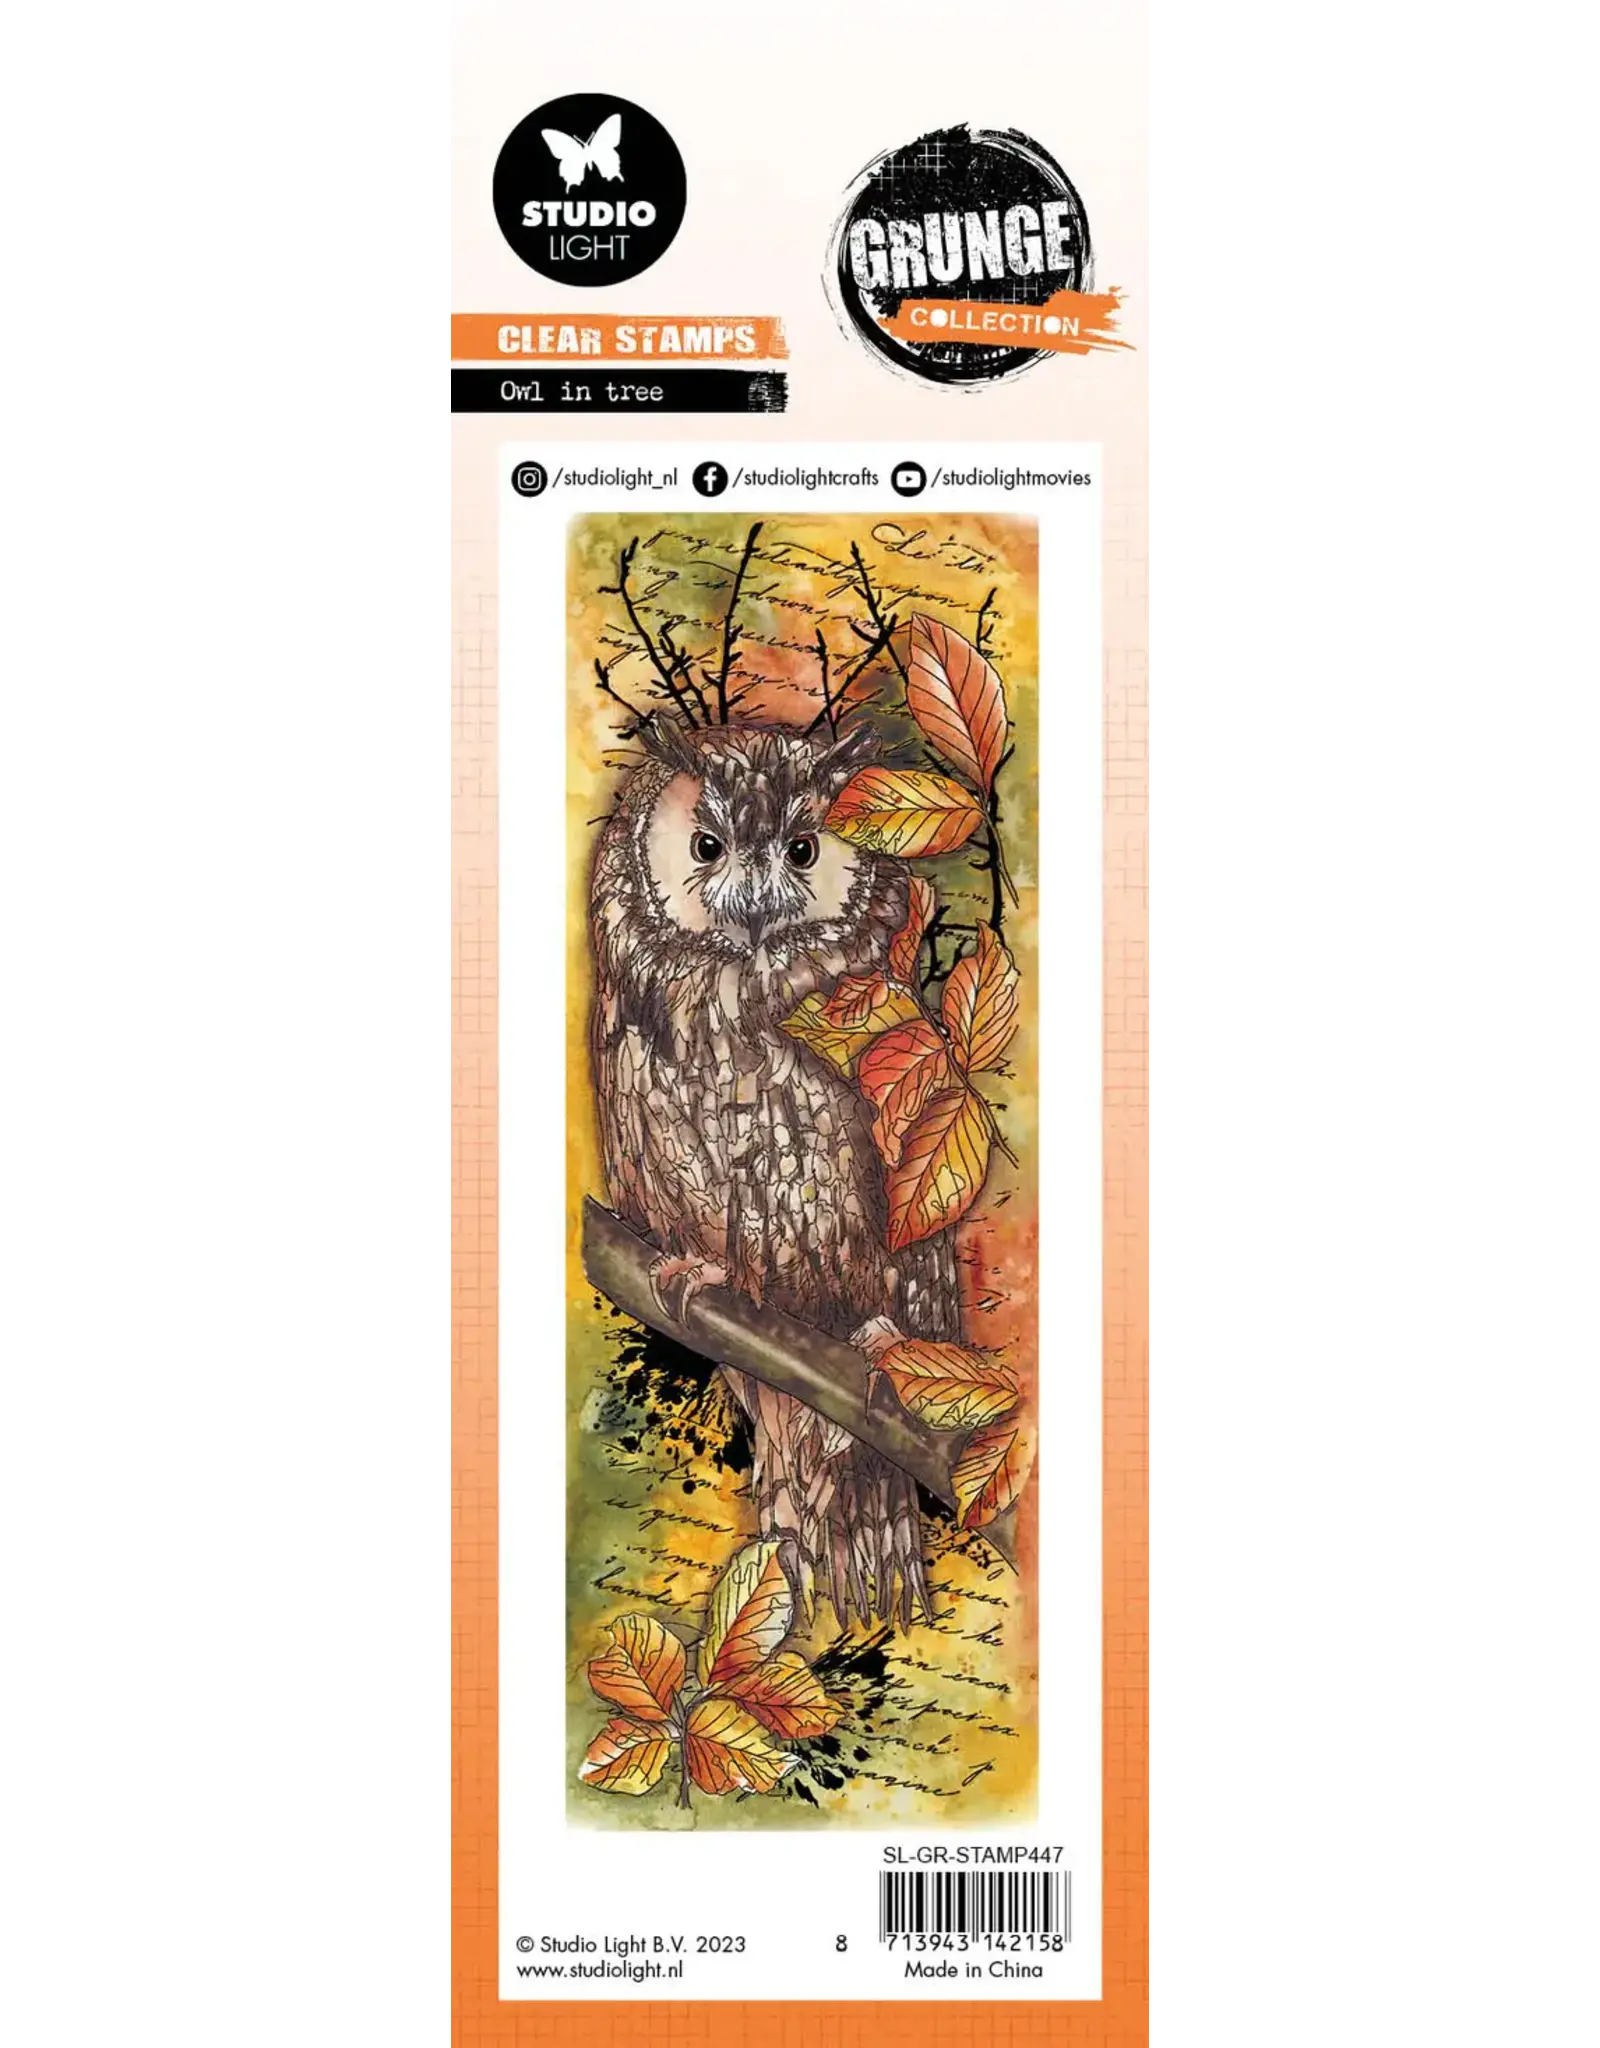 STUDIOLIGHT STUDIOLIGHT GRUNGE COLLECTION OWL IN TREE CLEAR STAMP